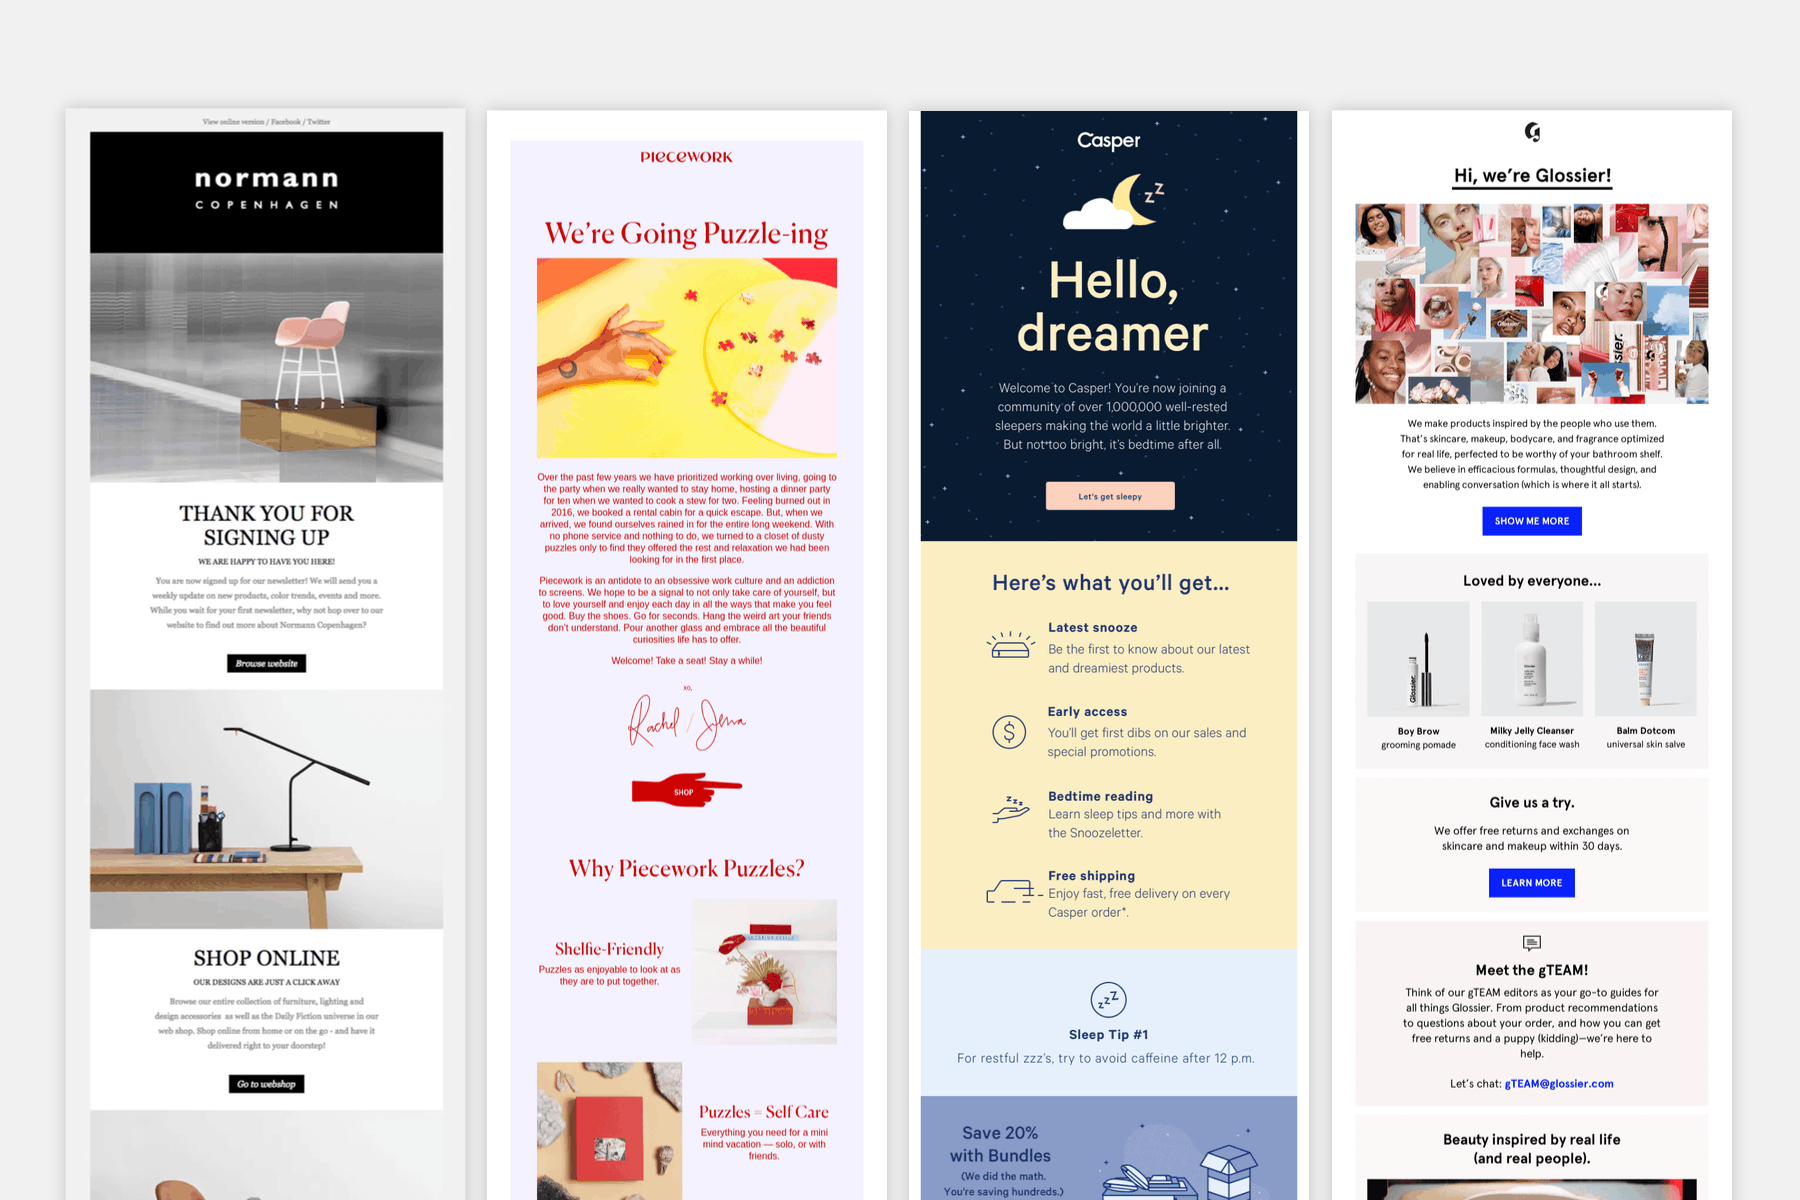 Different examples of welcome/onboarding emails.